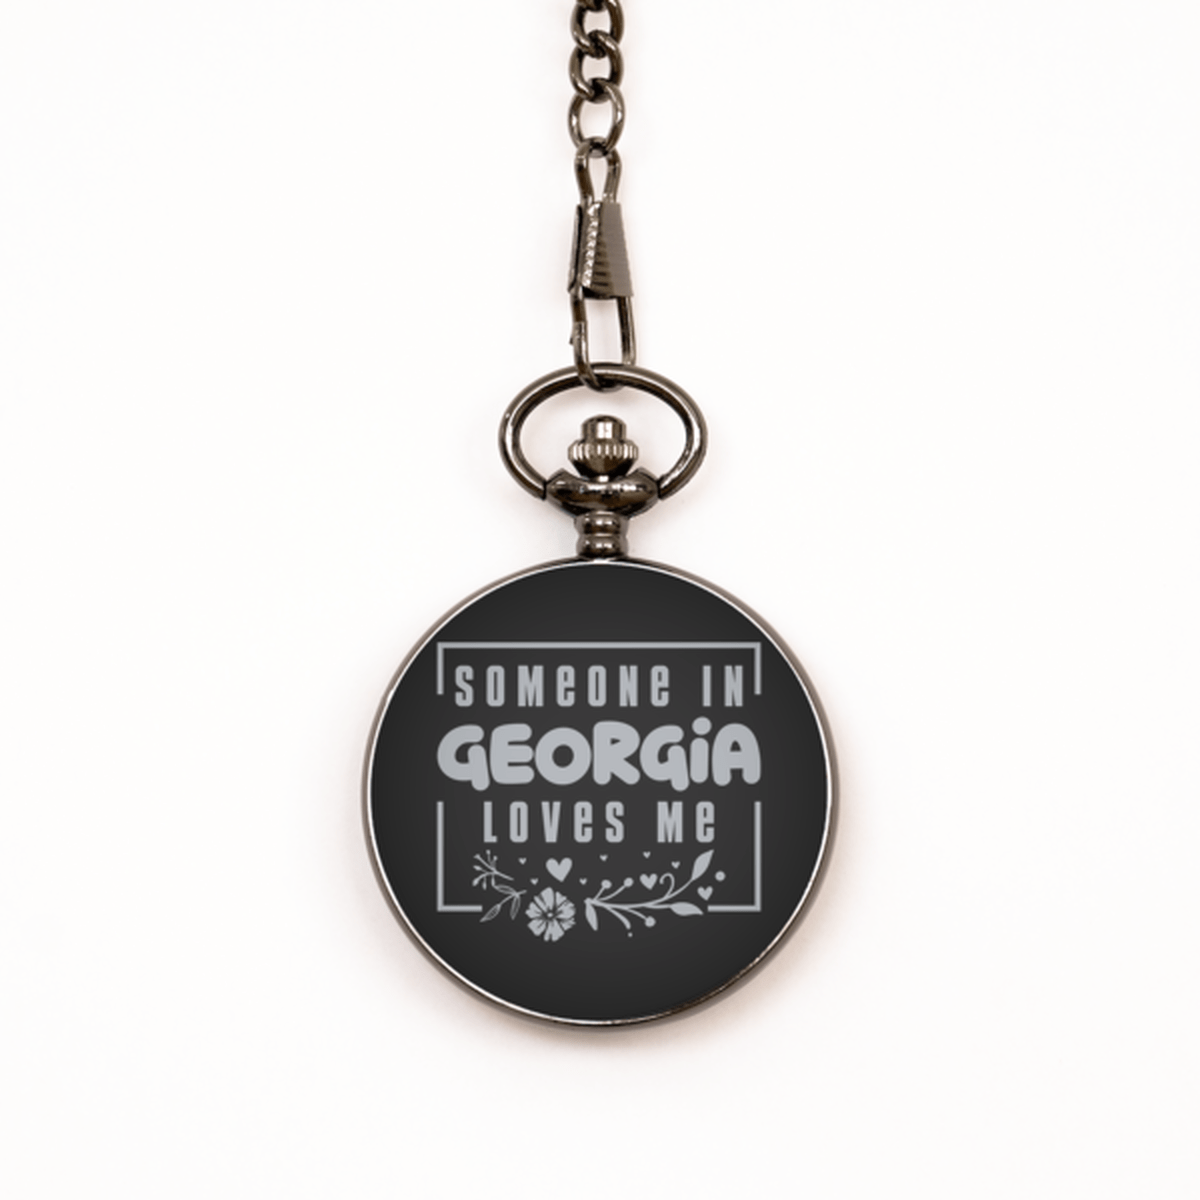 Cute Georgia Black Pocket Watch, Someone in Georgia Loves Me, Best Birthday Gifts from Georgia Friends & Family